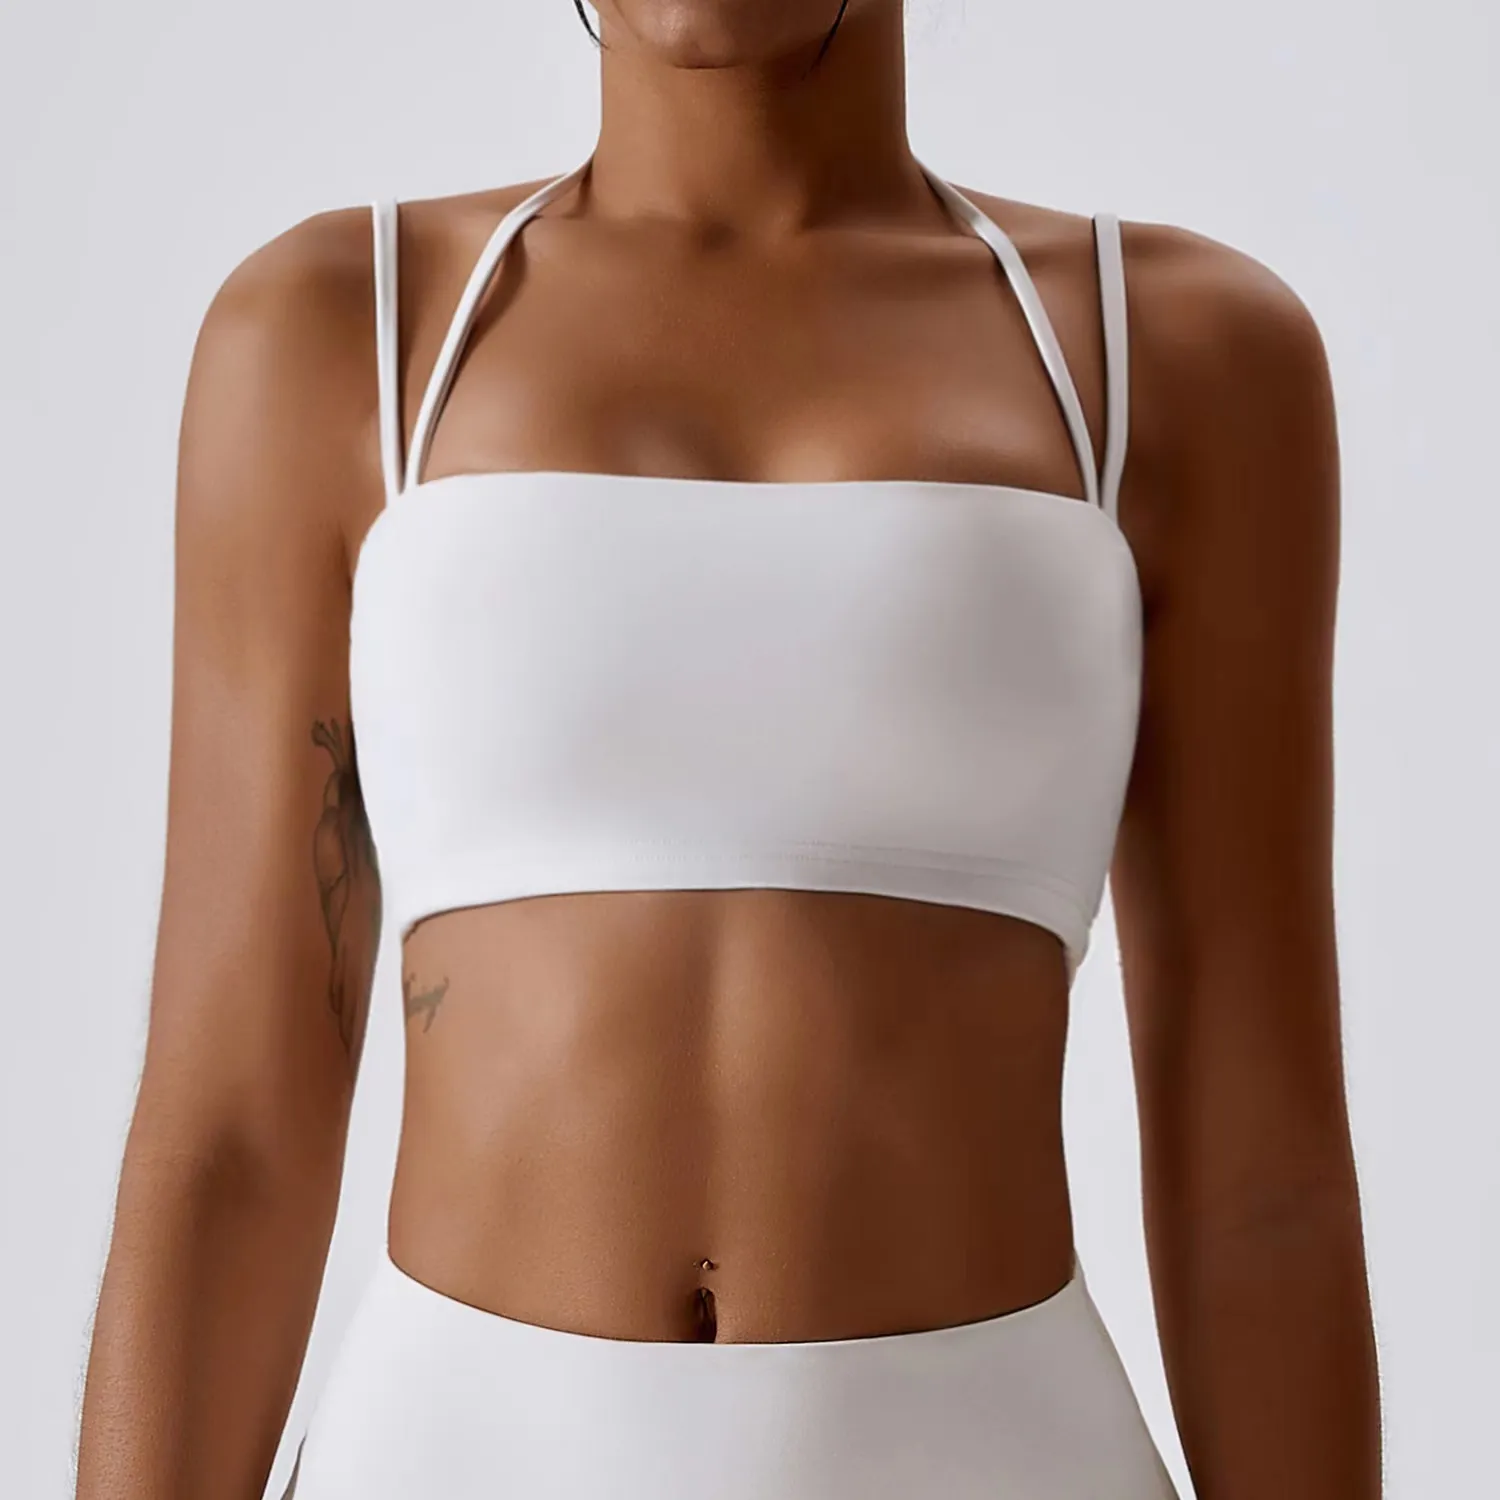 Designer Shock Proof Sports Bra For Women Lululemens Yoga Sports Underwear  Women With Beauty Back And Top Cups Asian Size From Trendyliving, $24.91